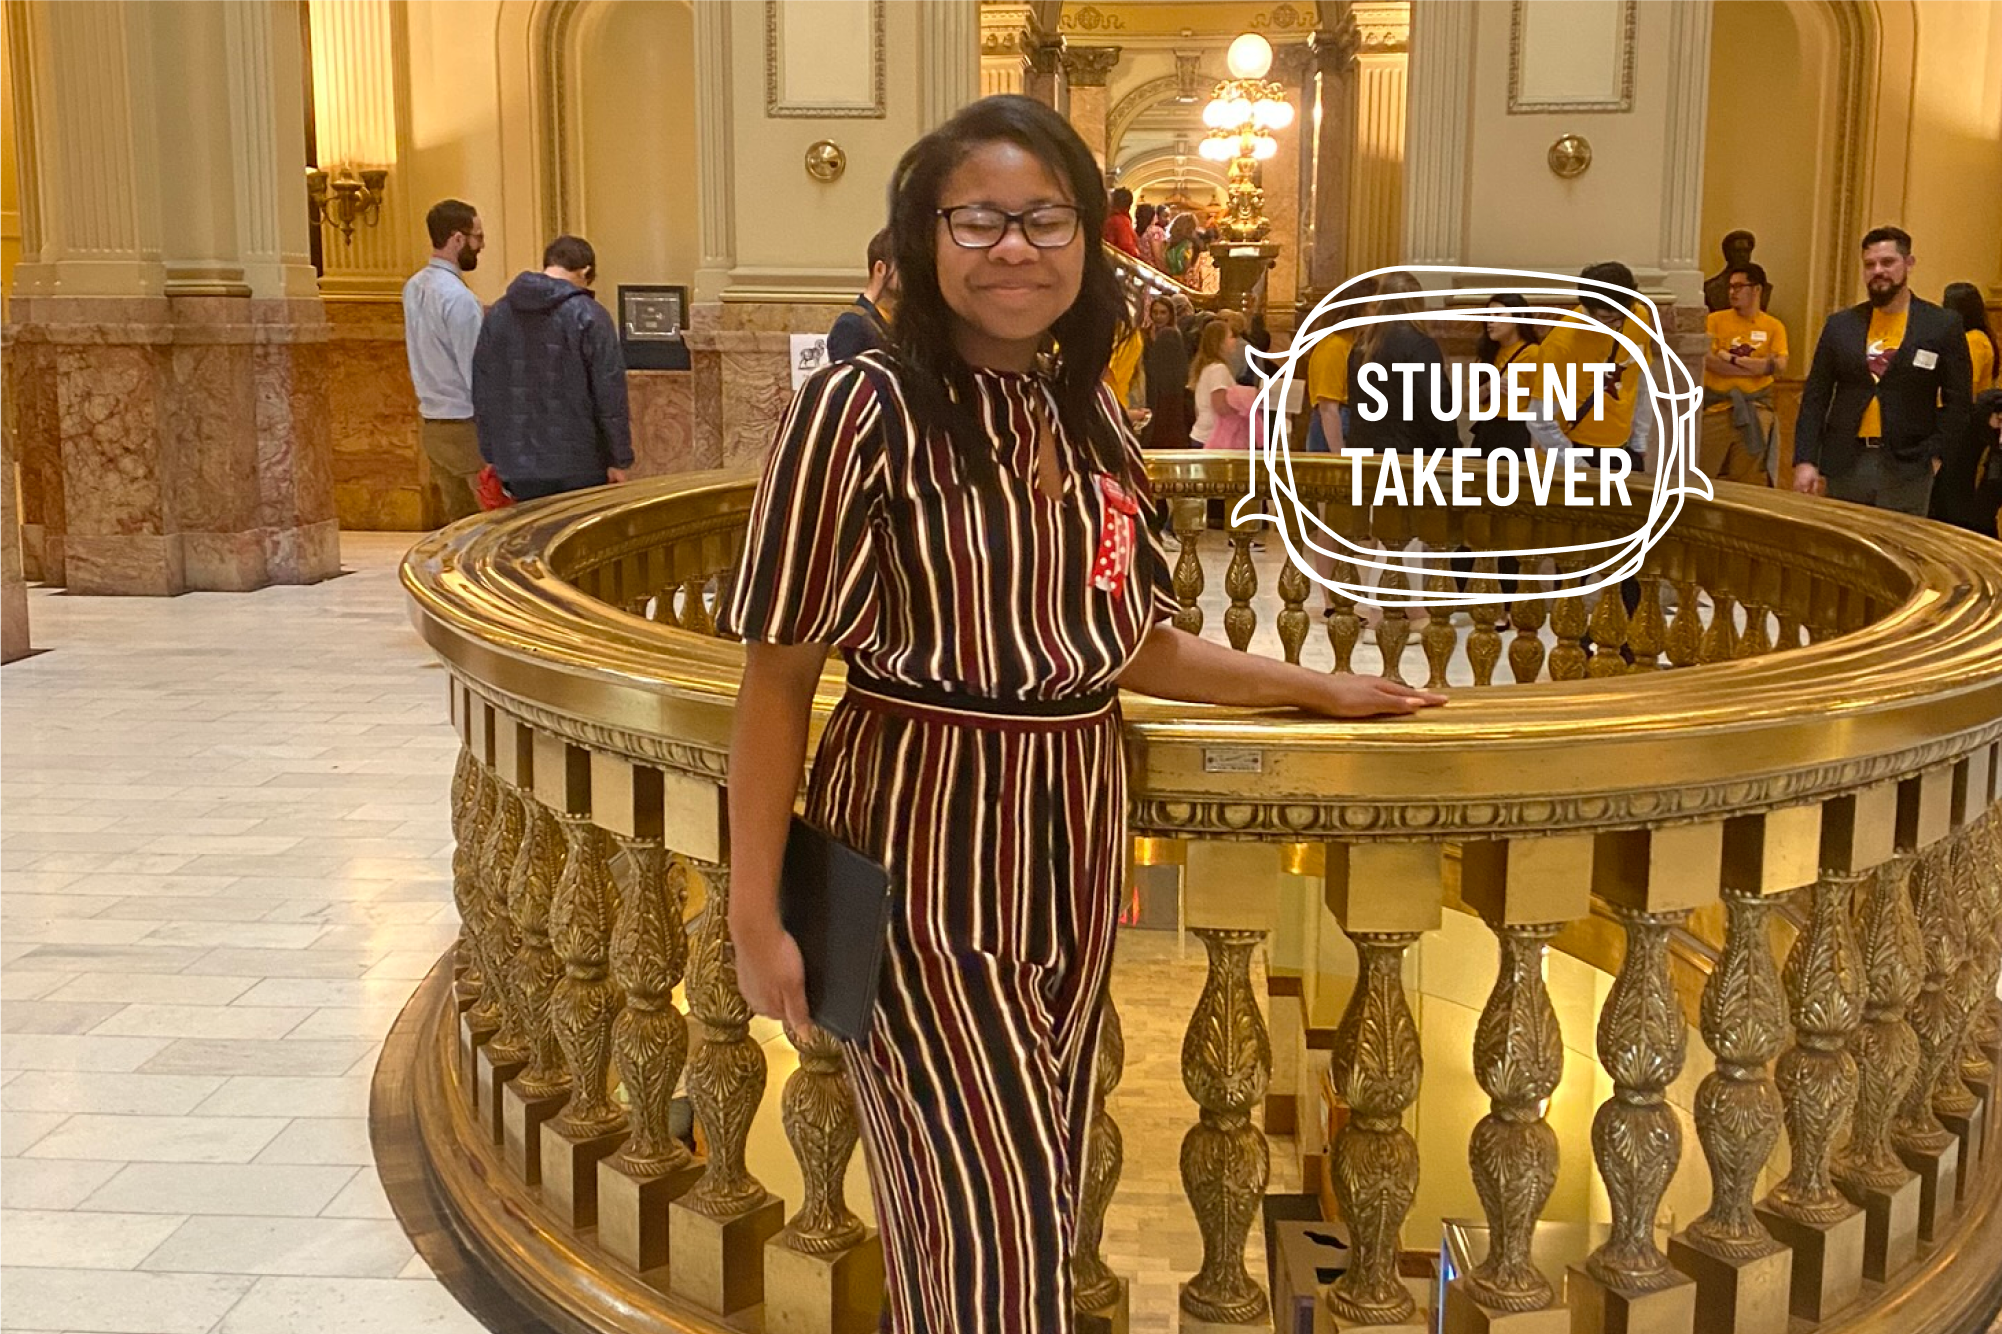 Jayla Hemphill wearing a striped jumpsuit, standing next to an ornate gold hand-railing smiling.